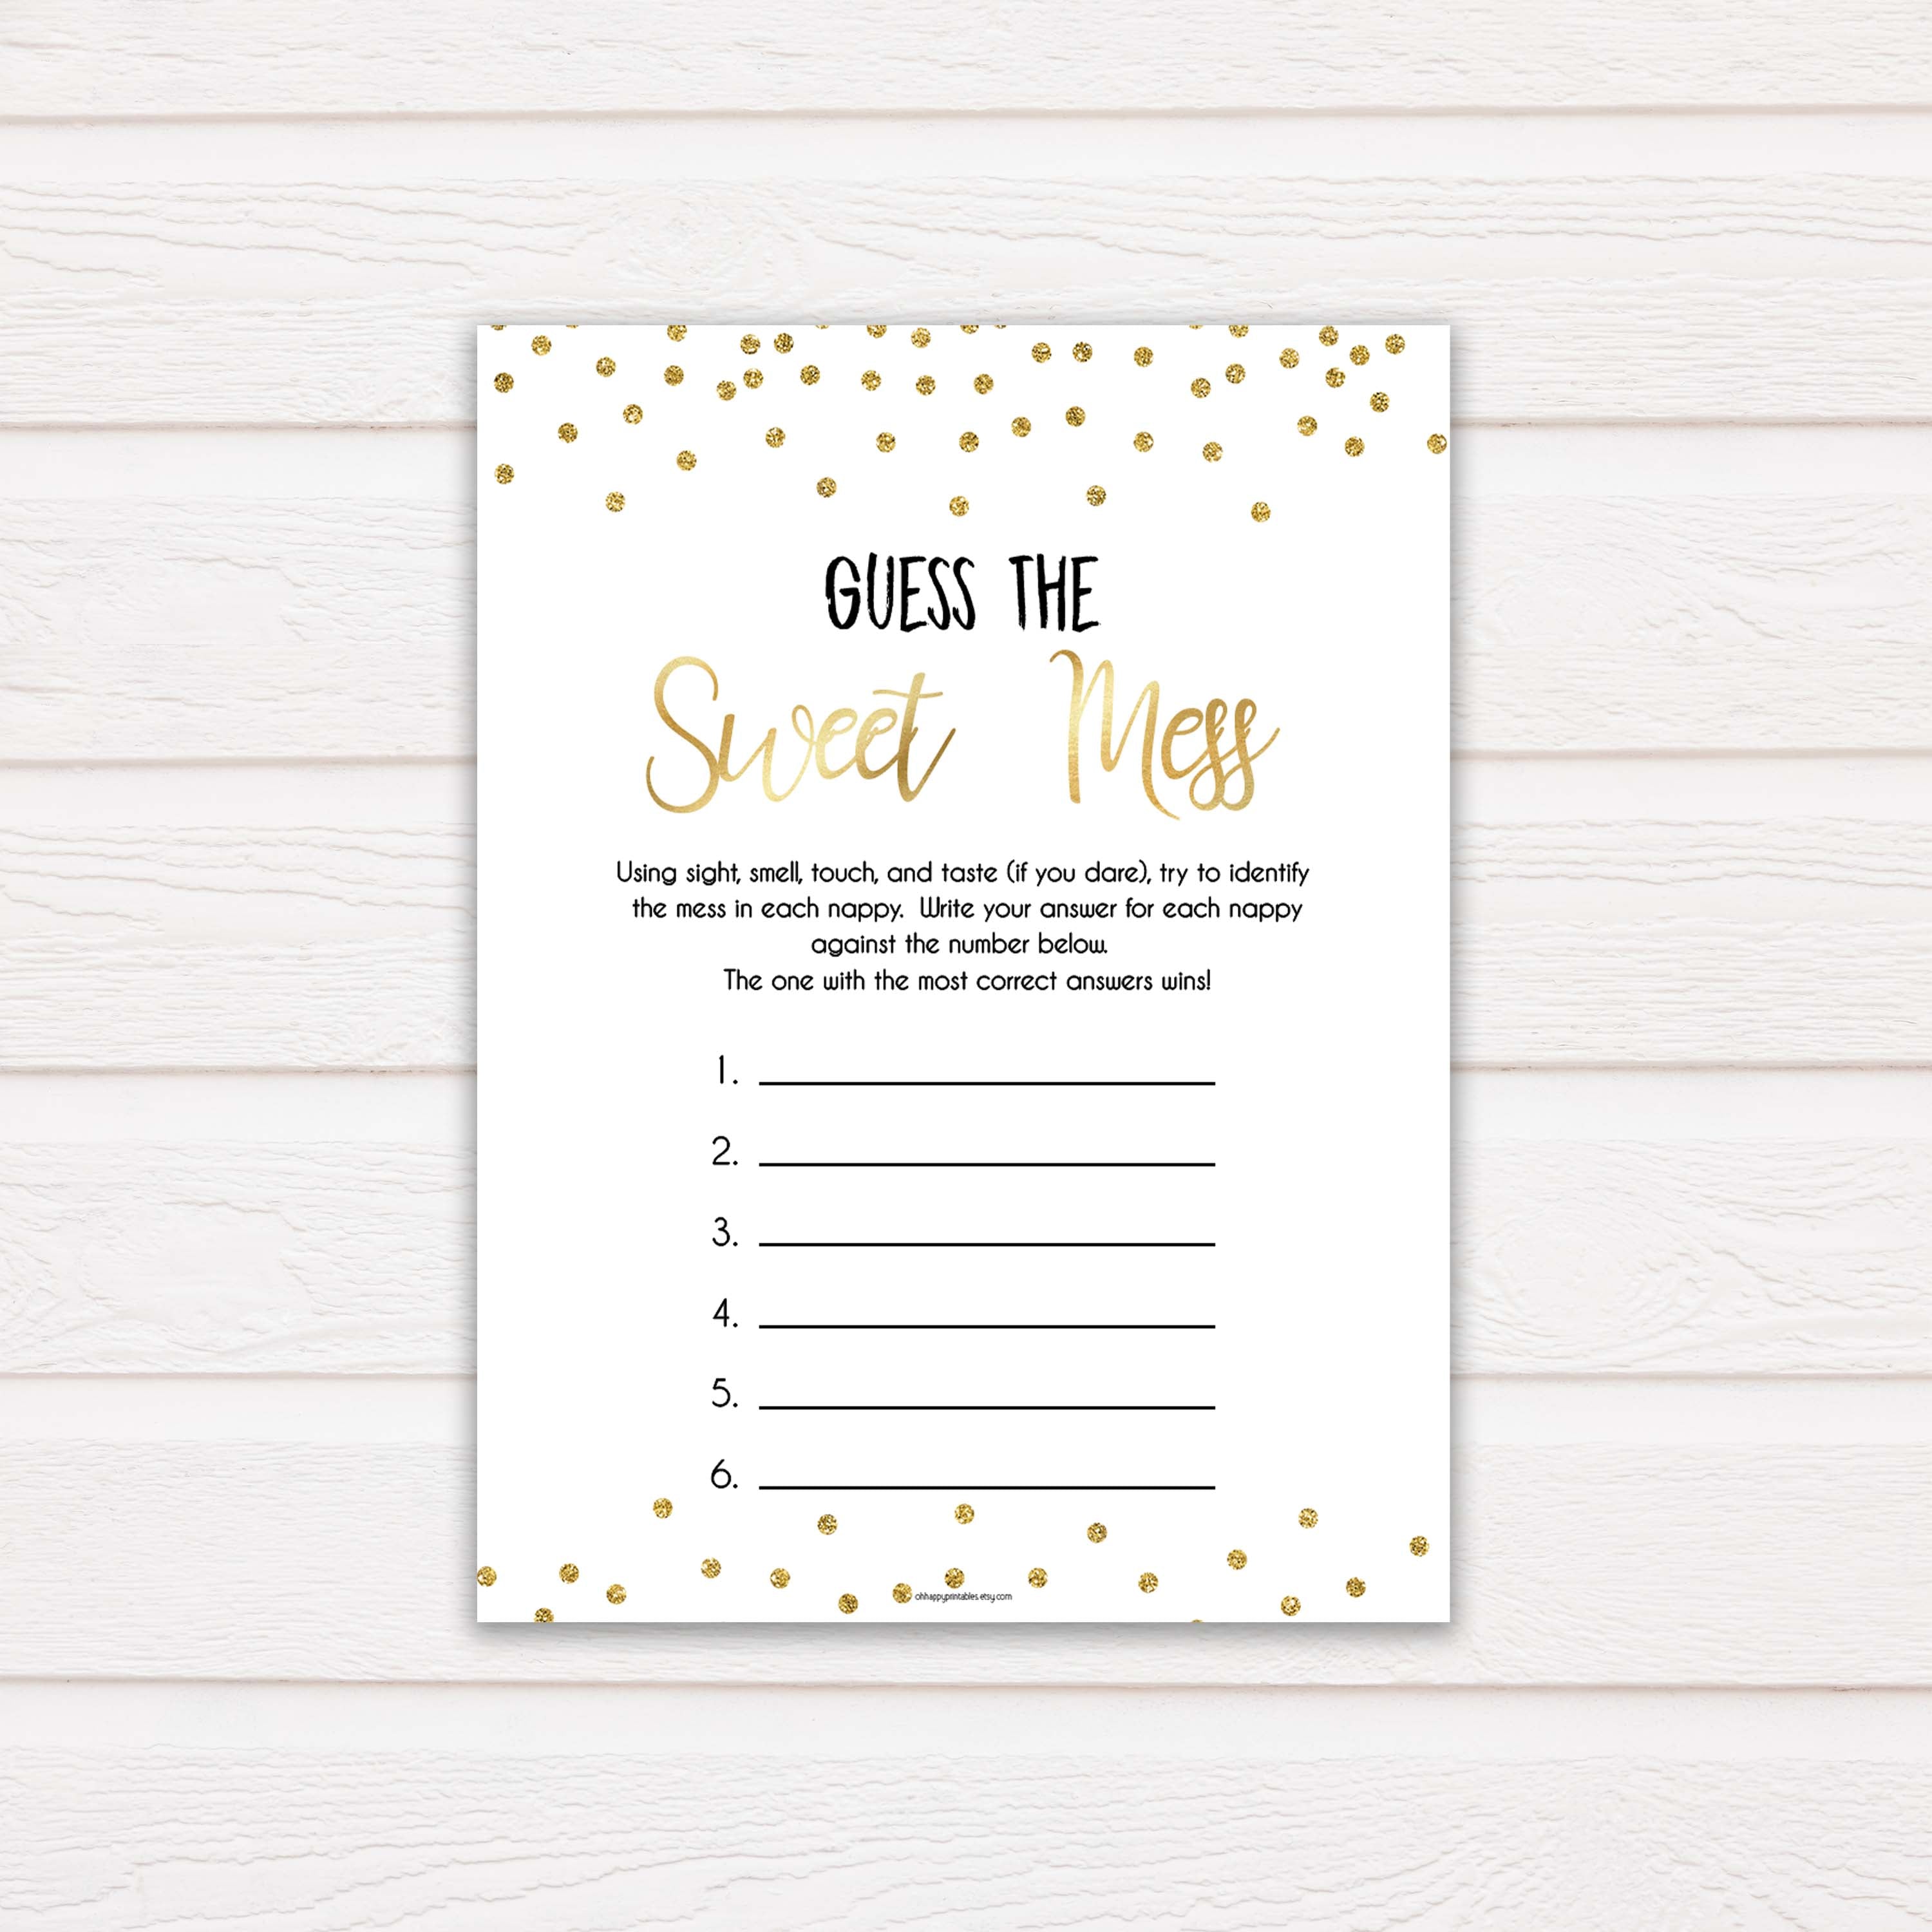 Gold Glitter Baby Shower Guess The Mess Game, Gold Glittter Baby Shower Guess The Sweet Mess, Baby Shower Games, Guess The Mess, hilarious baby shower games, funny baby games, bets baby games